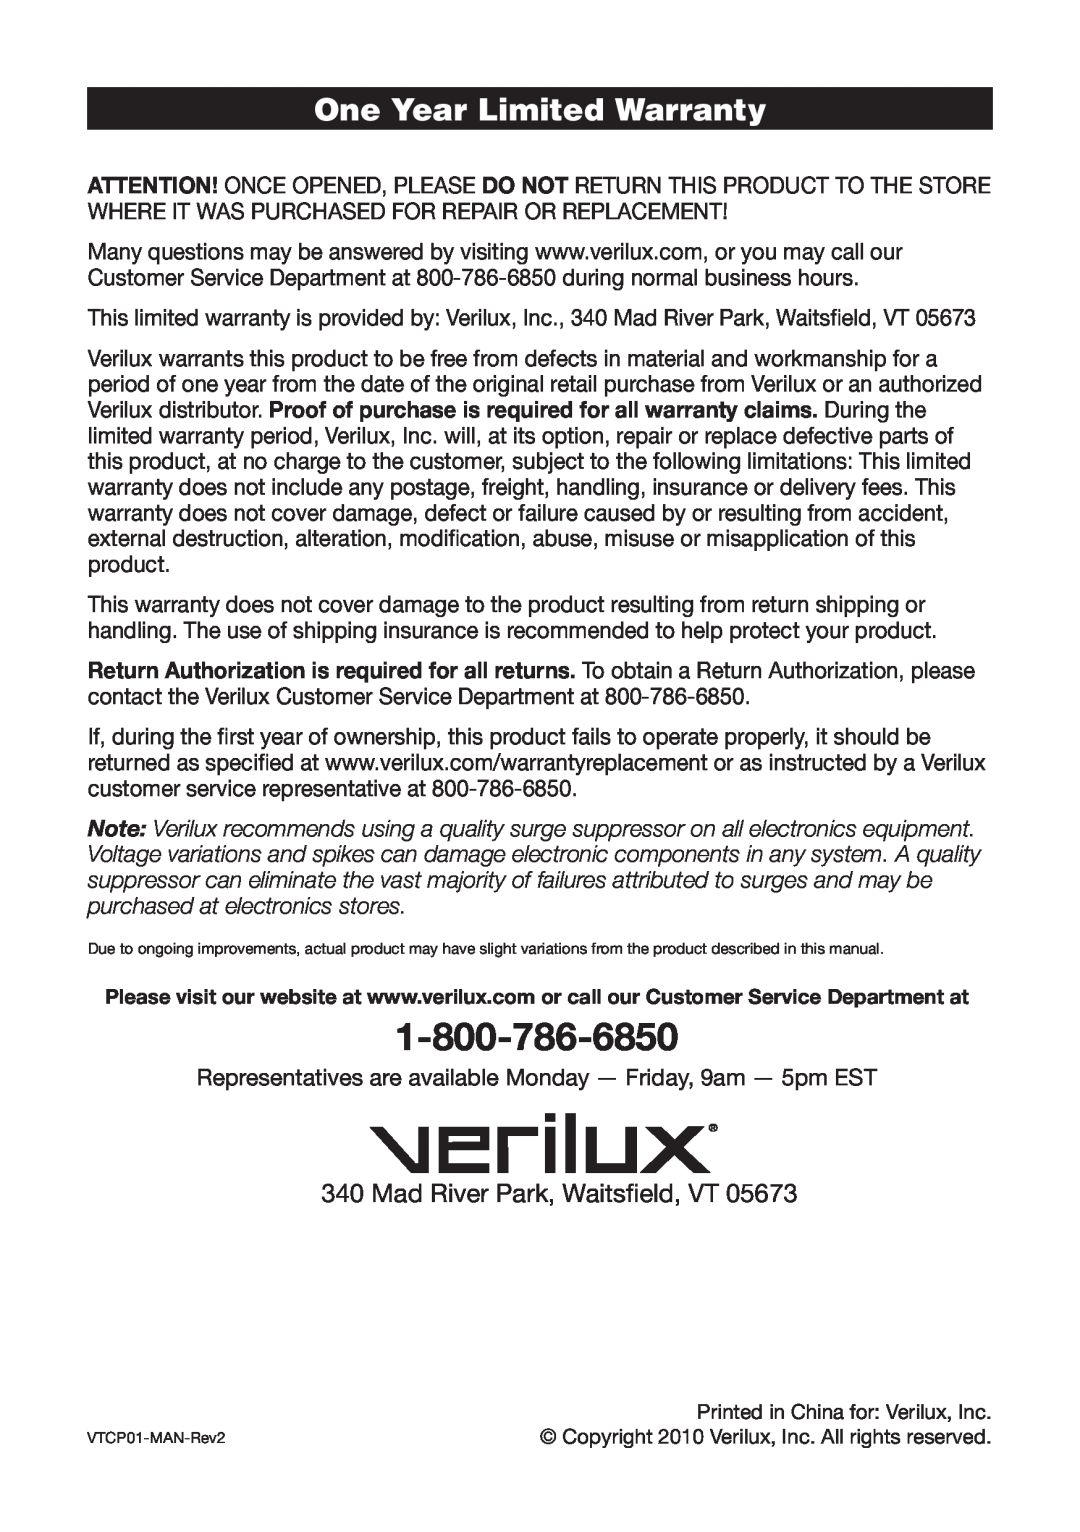 Verilux VTCP01 manual One Year Limited Warranty, Mad River Park, Waitsﬁeld, VT 